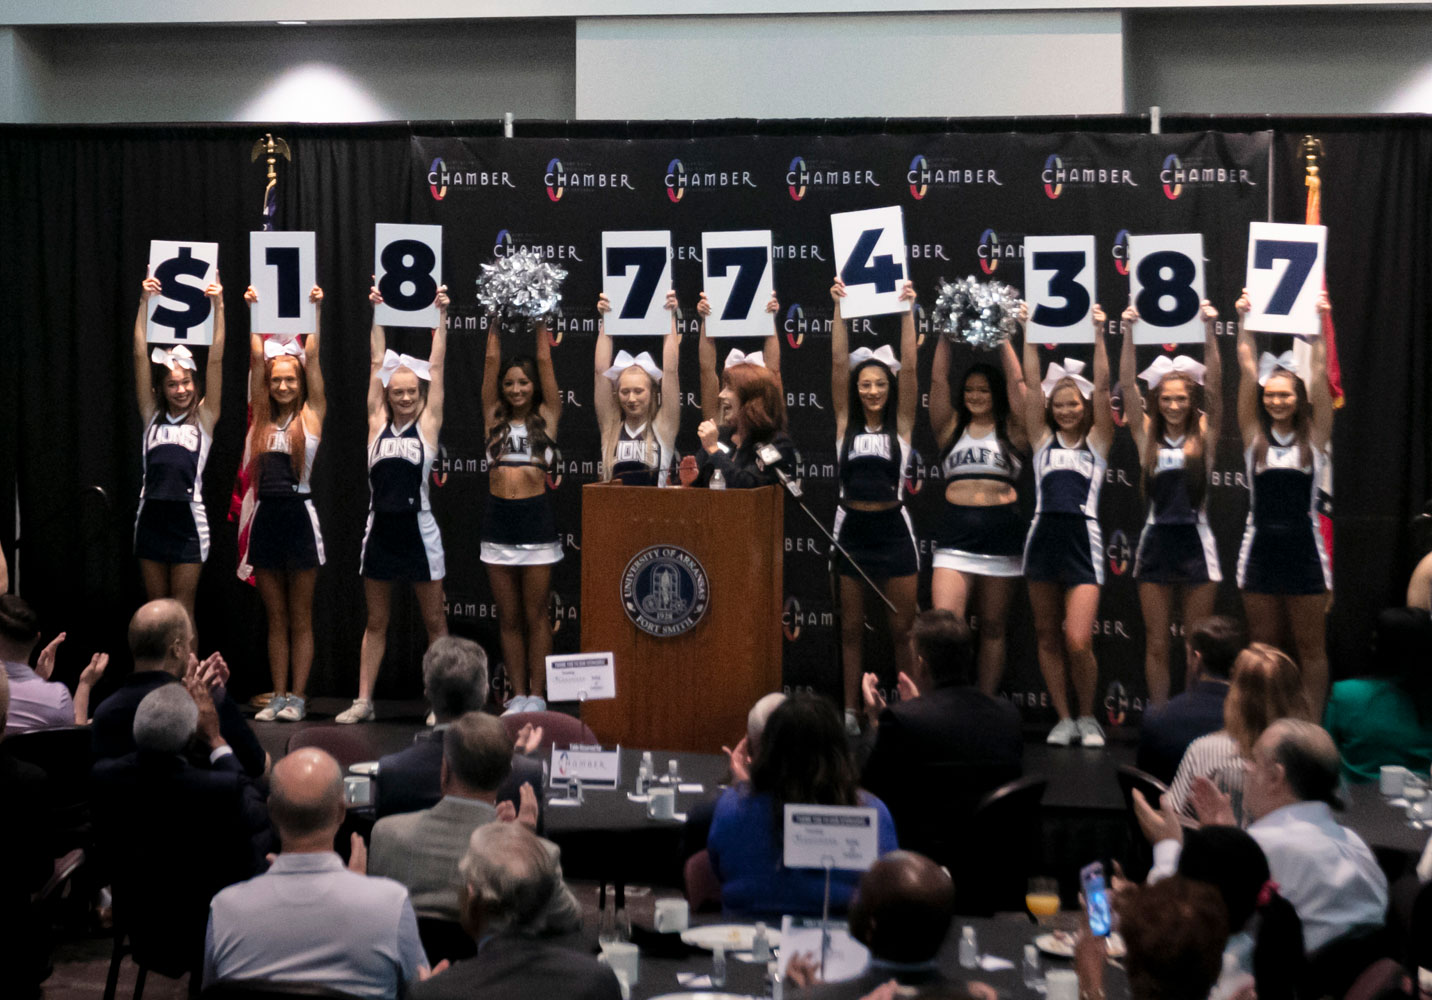 Eleven cheerleaders hold signs that read $18,774,387 on stage at gift announcement. 